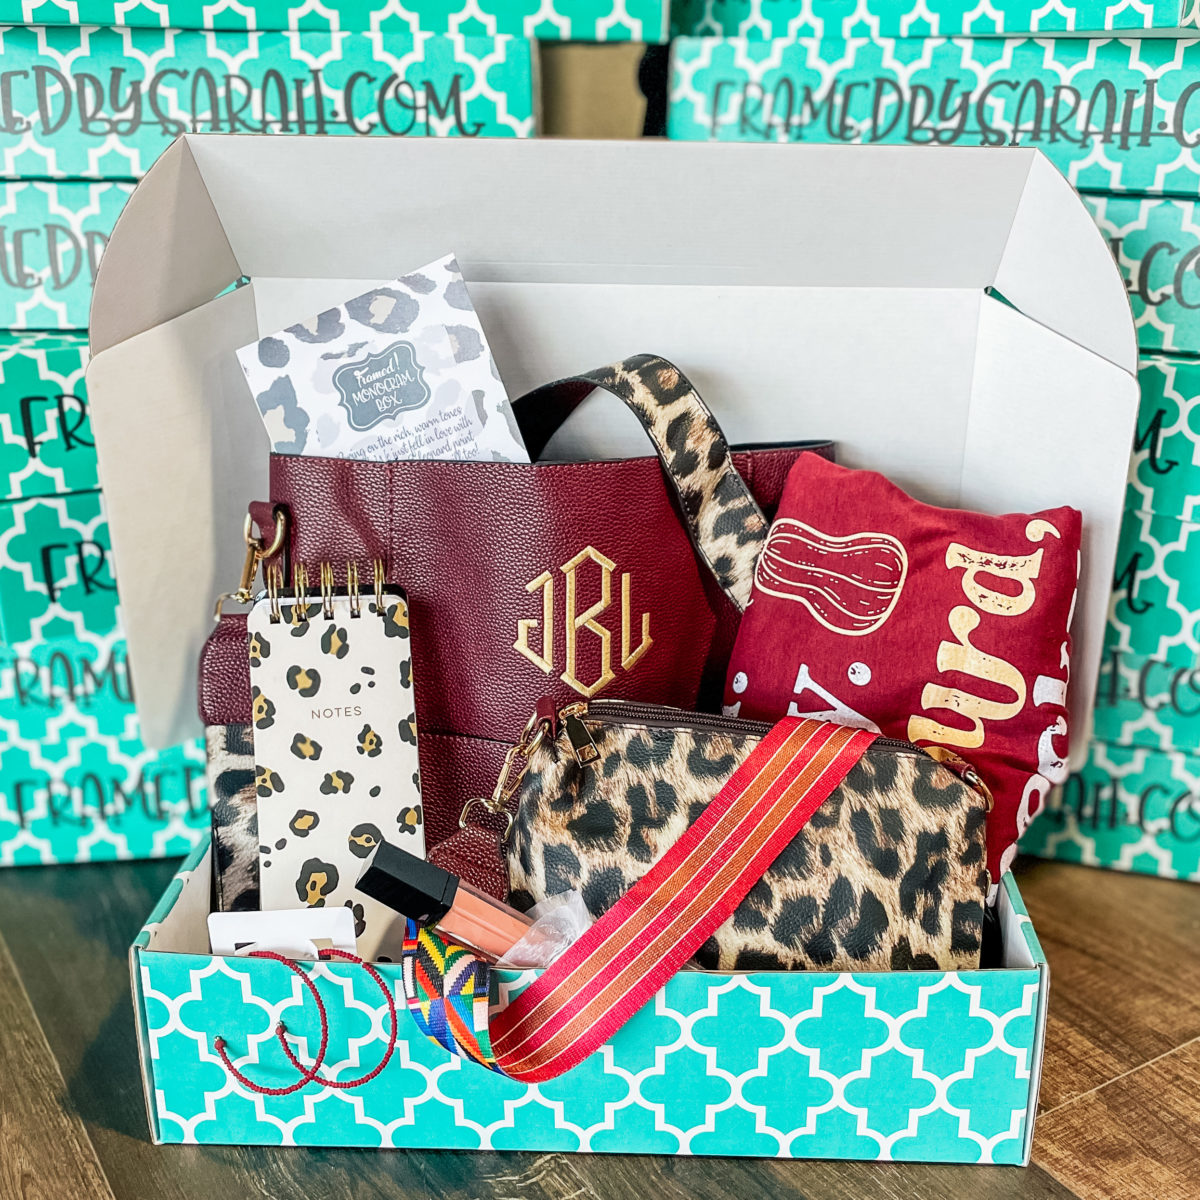 Falling in Love with Fall - September Monogram Box Reveal